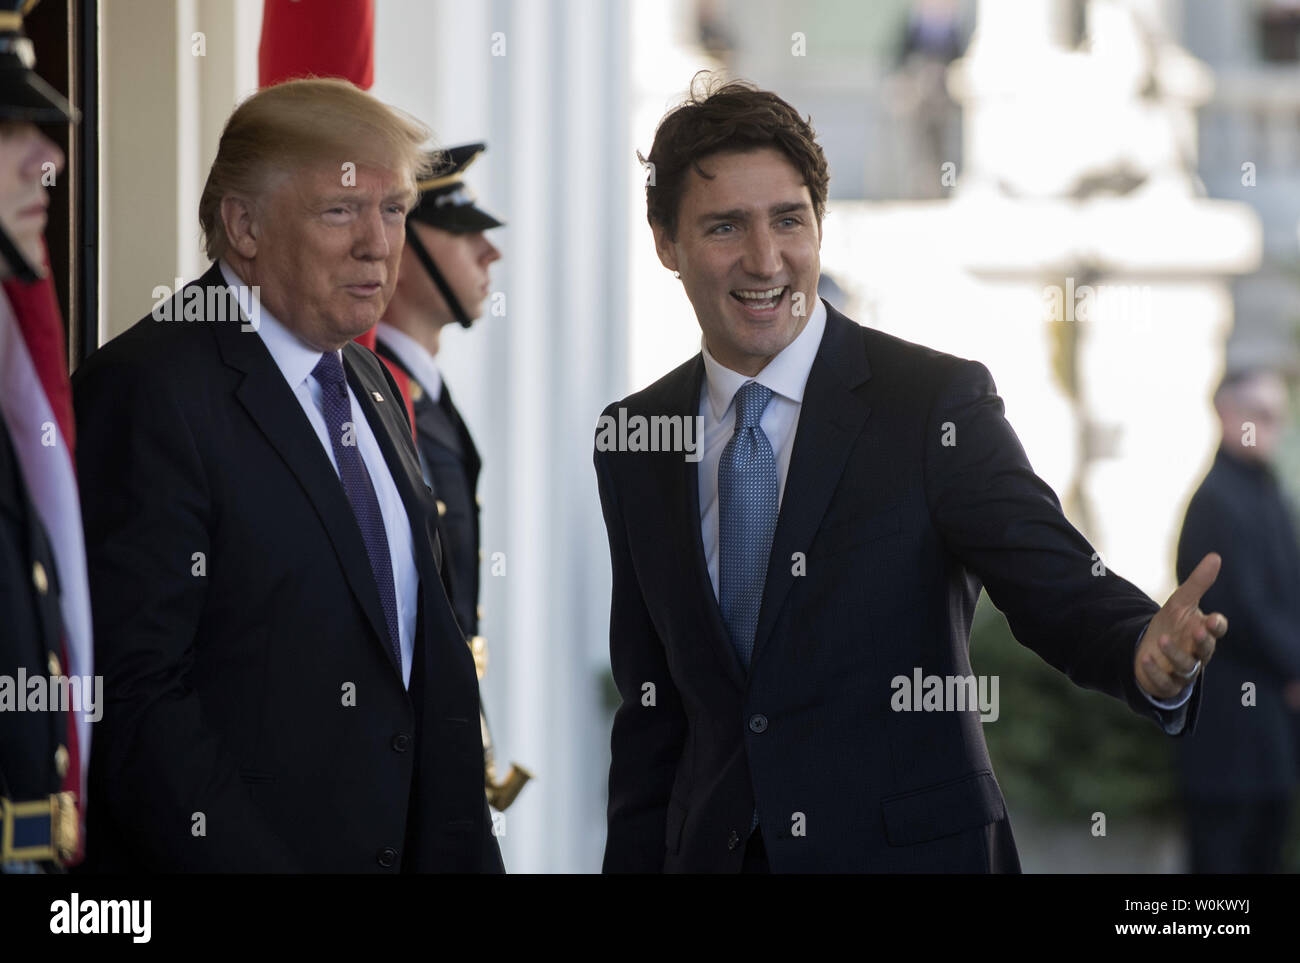 U.S. President Donald Trump greets Canada's Prime Minister Justin Trudeau on a windy day to the West Wing of the White House in Washington D.C. on February 13, 2017. The two leaders will have meetings and a press conference later in the day.   Photo by Pat Benic/UPI Stock Photo